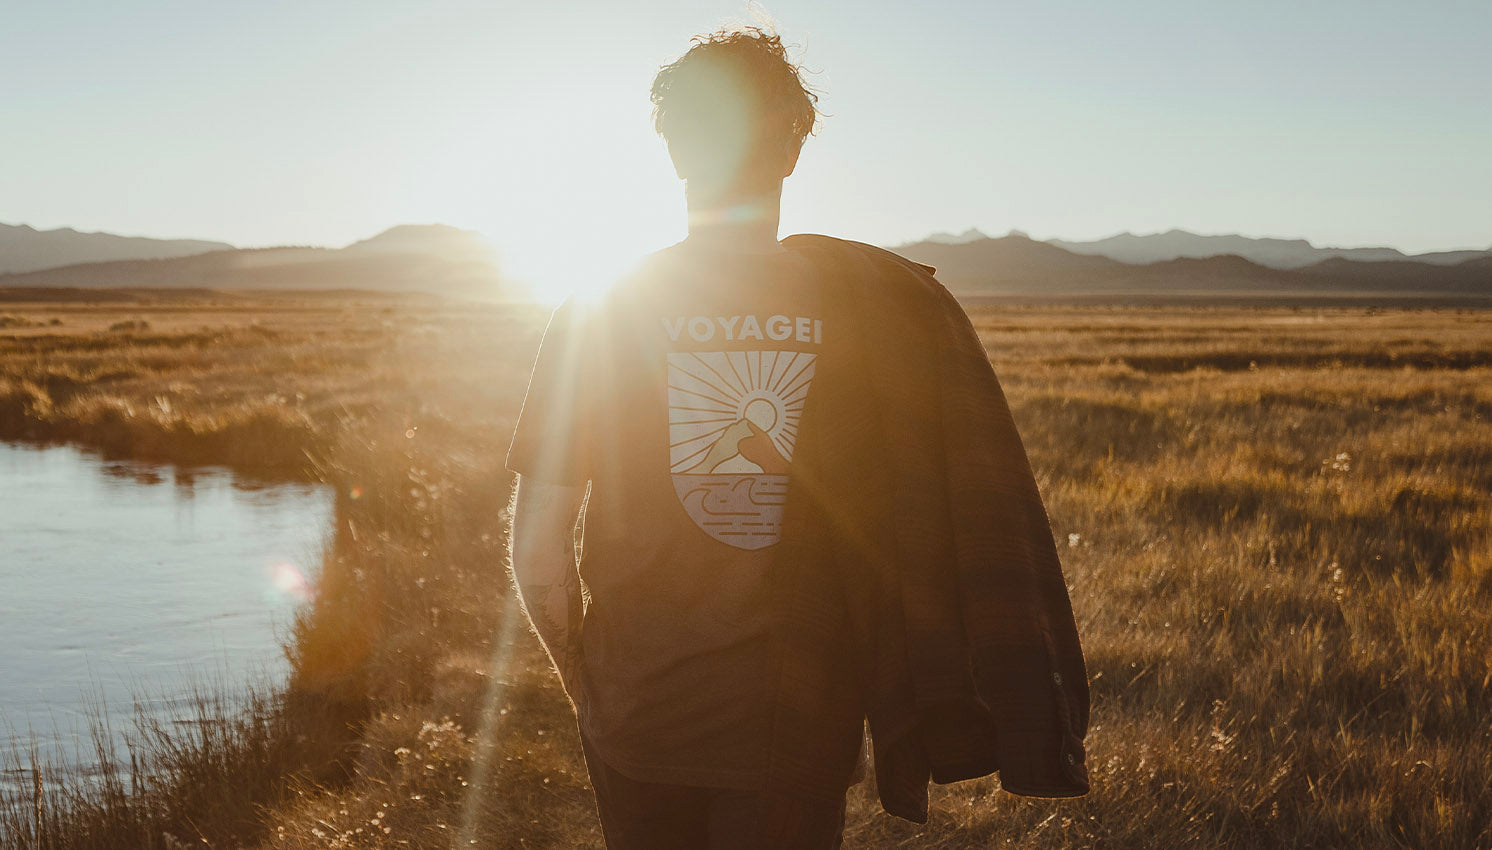 voyager clothing website